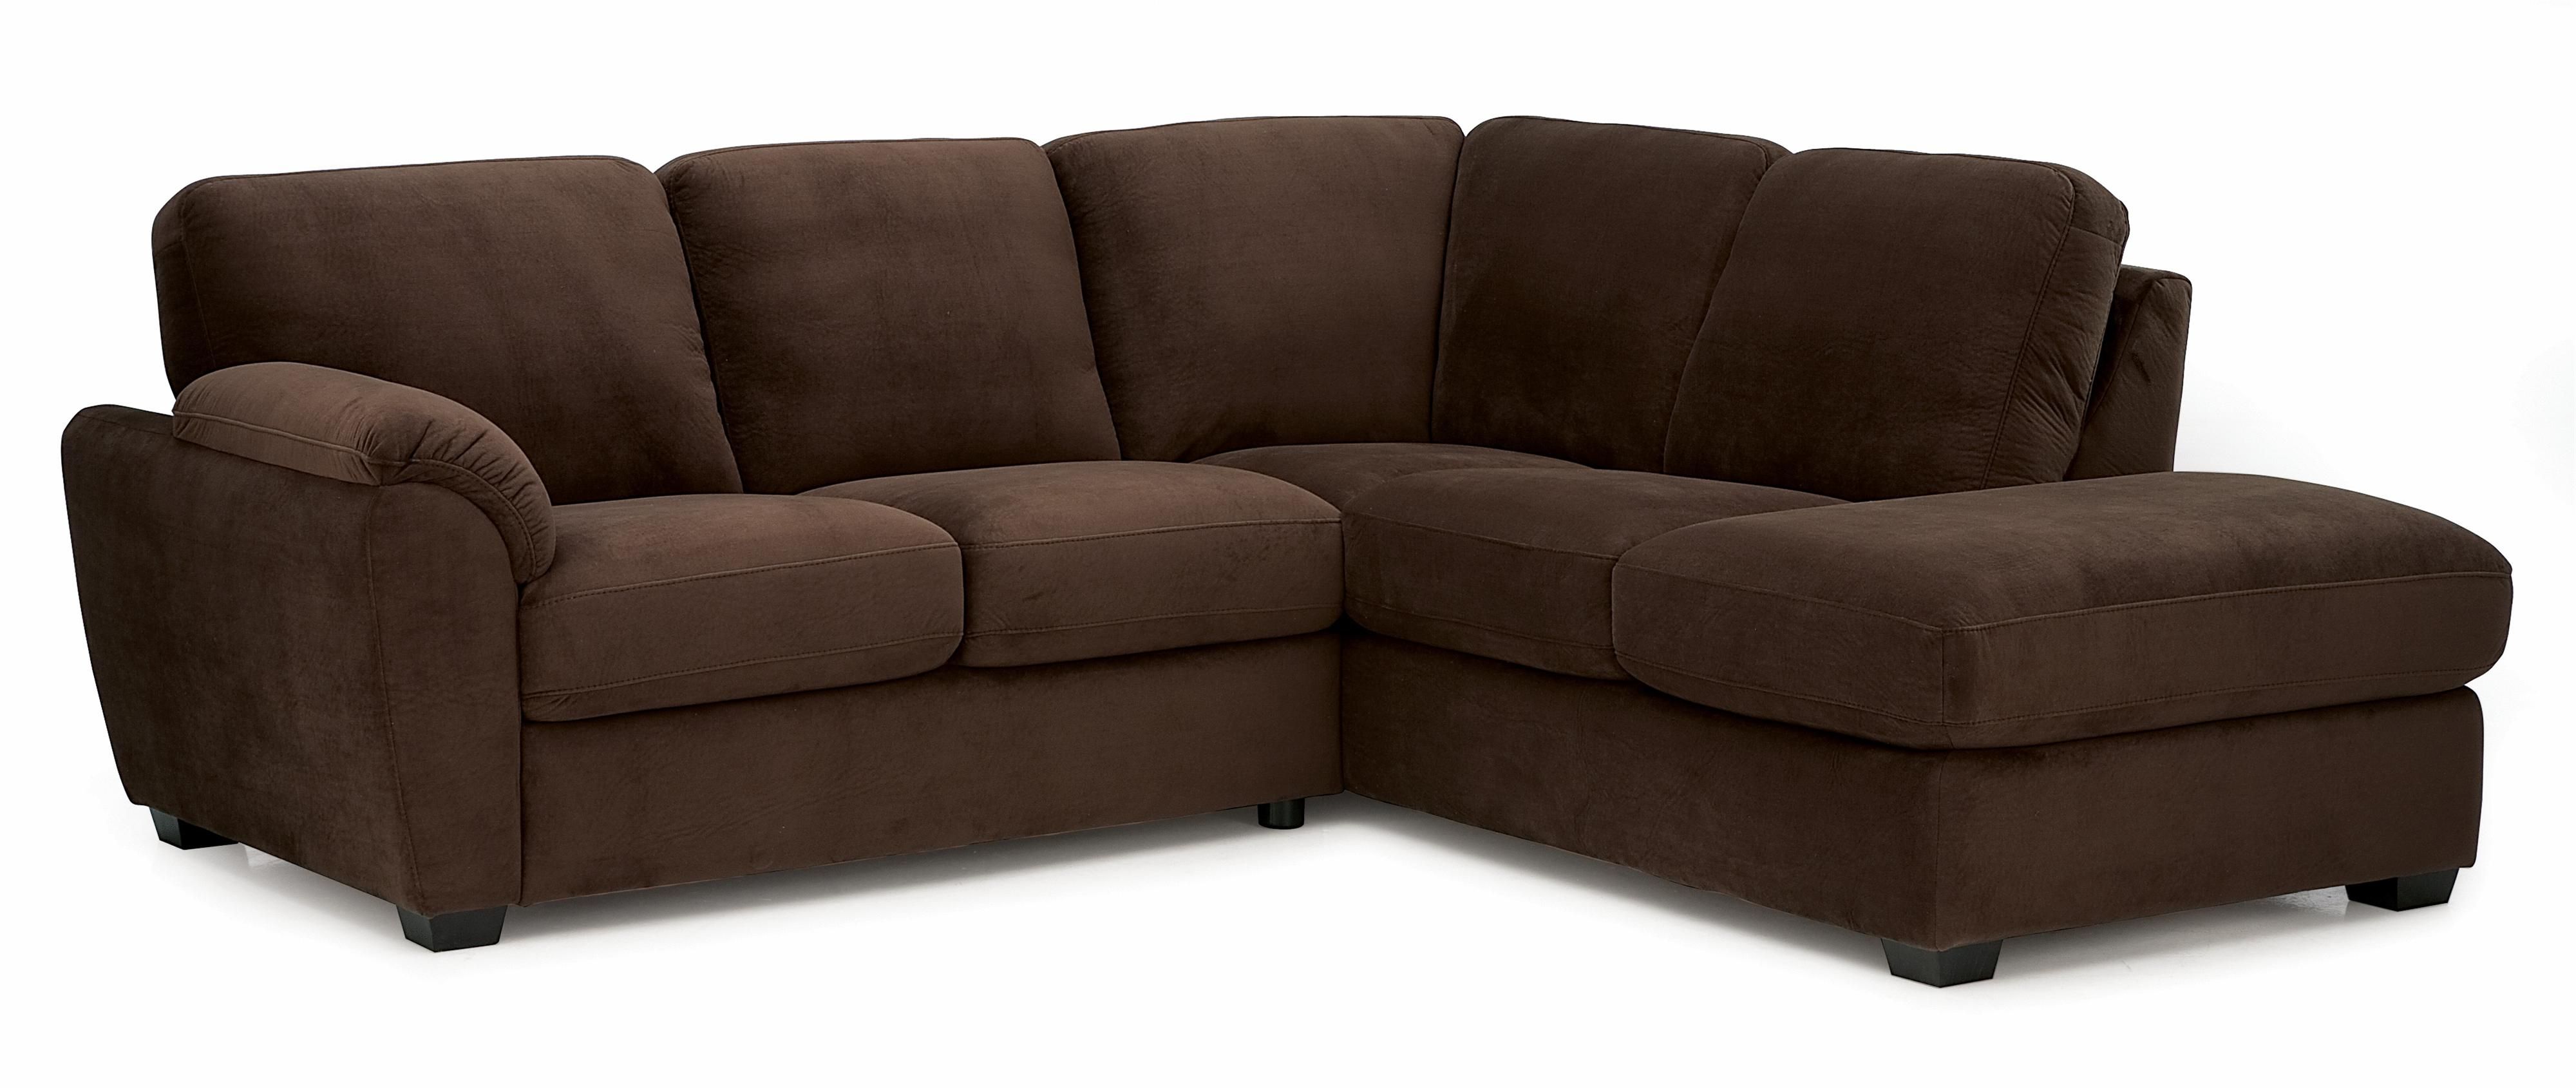 Fashionable Palliser Lanza Casual Sectional Sofa With Rhf Corner Chaise – Ahfa With Regard To Duluth Mn Sectional Sofas (View 14 of 20)